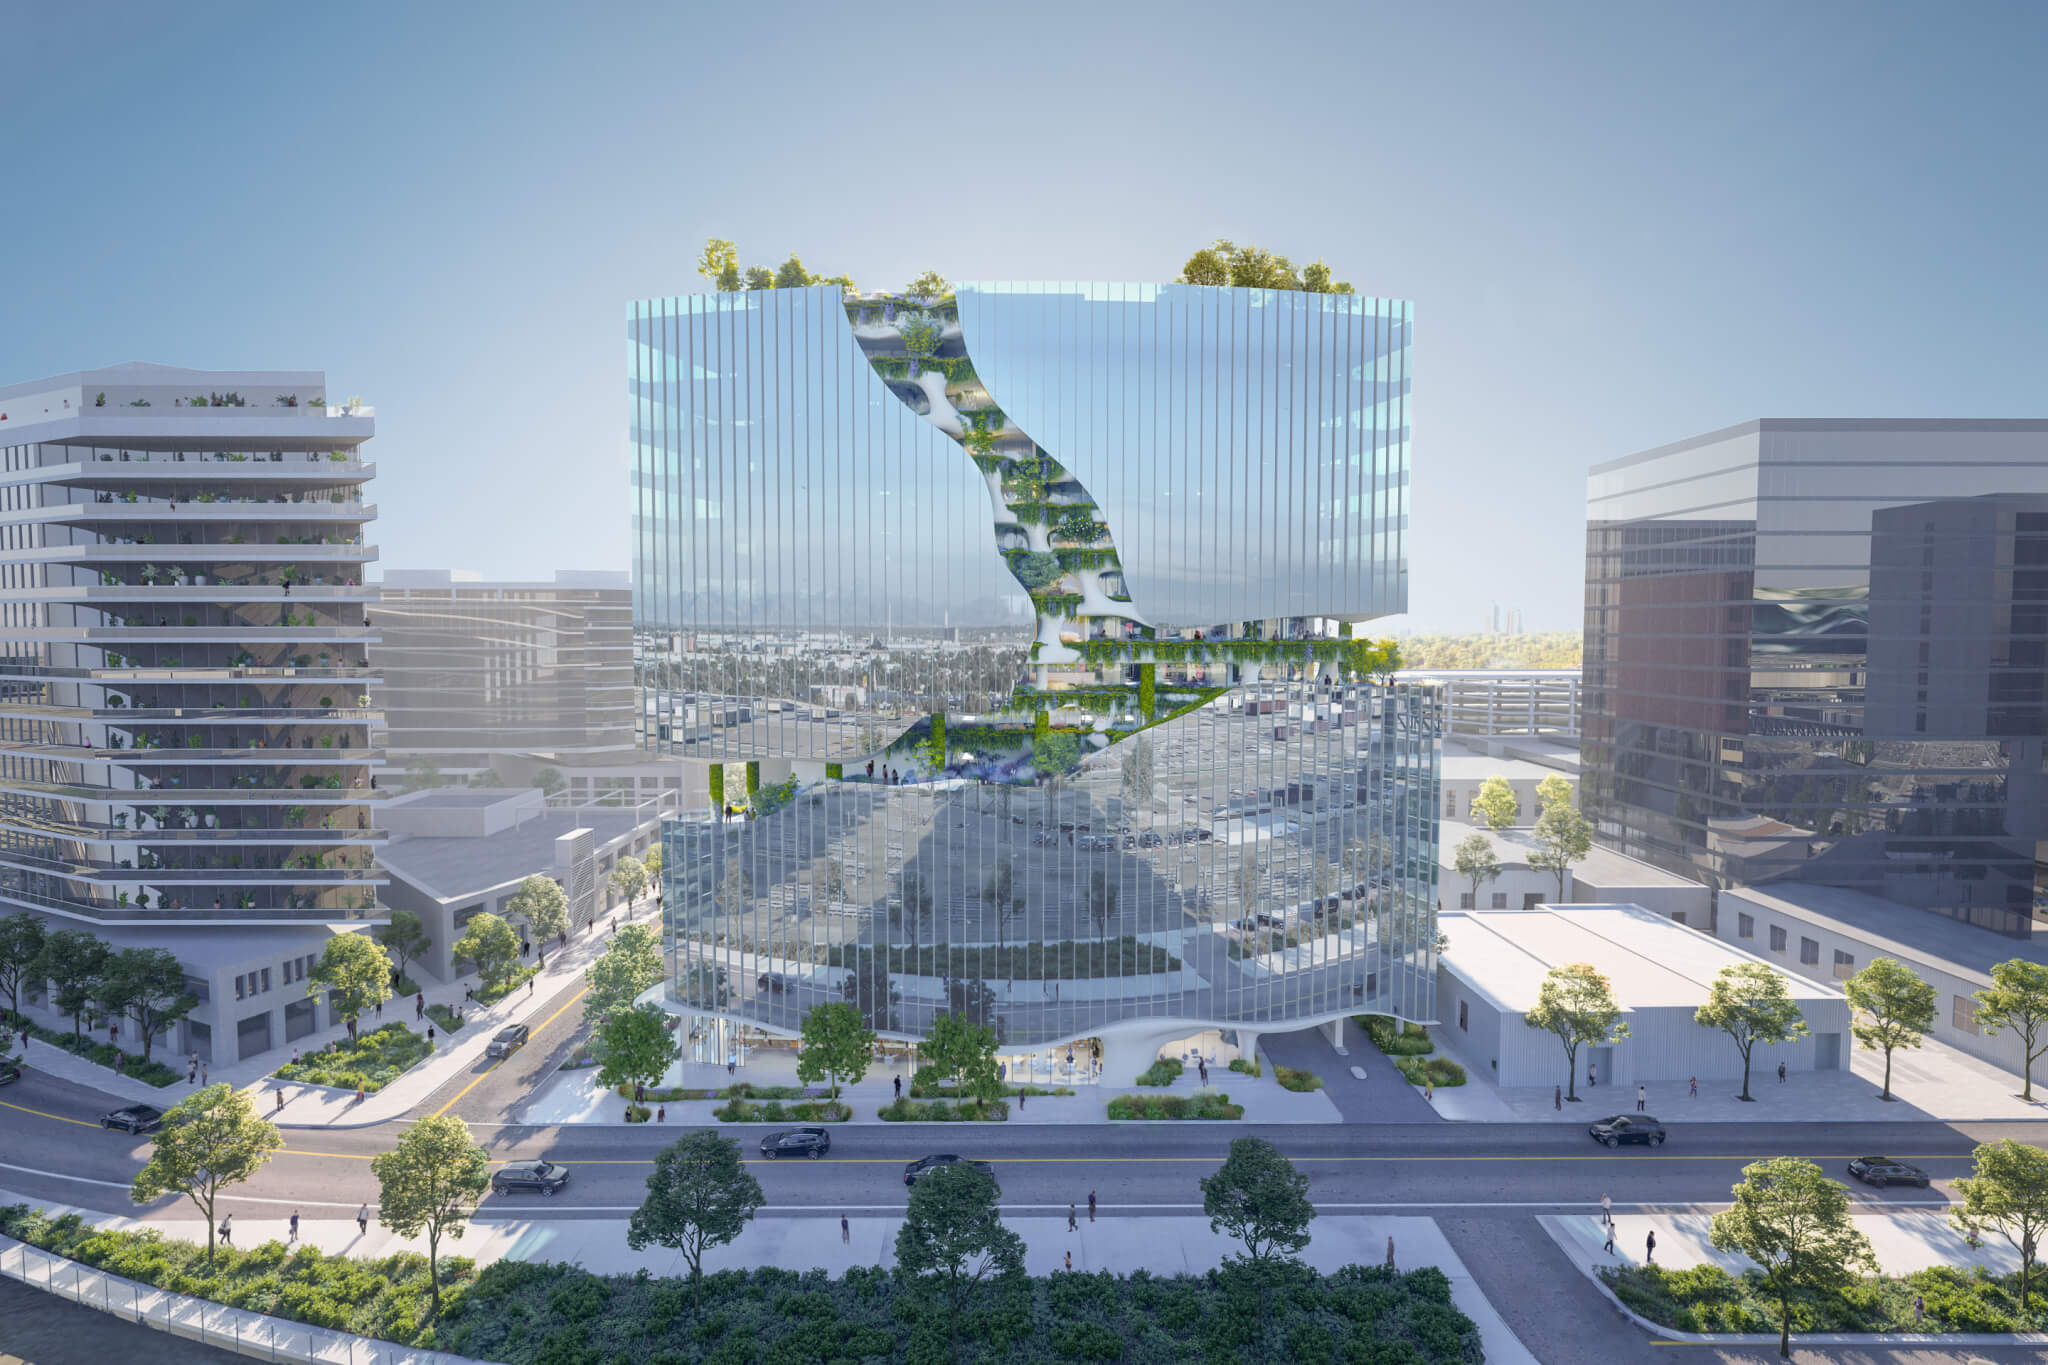 rendering of a glazed building with a "green" canyon